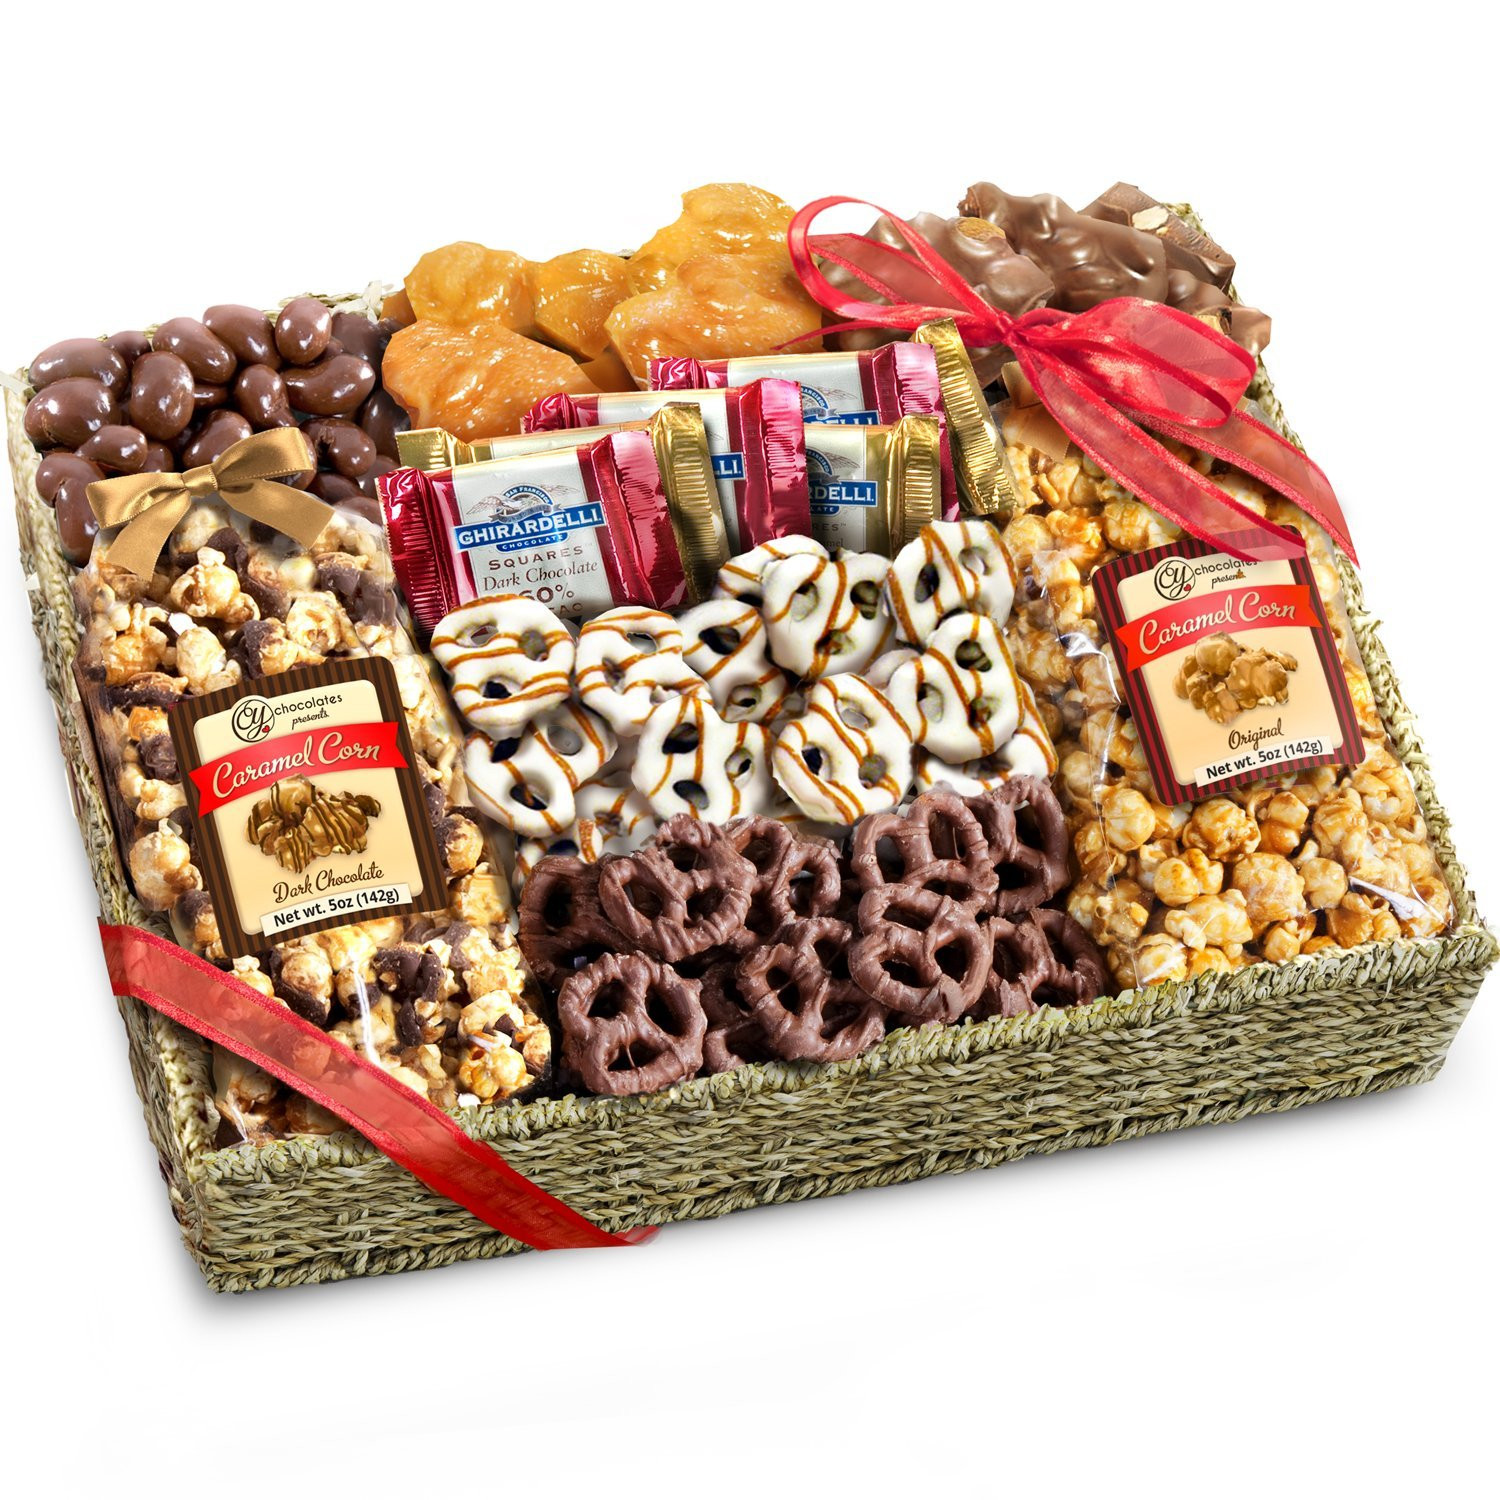 Cookie Gift Basket Ideas
 Cookie Gift Boxes & Baskets Best Holiday Treats Snacks